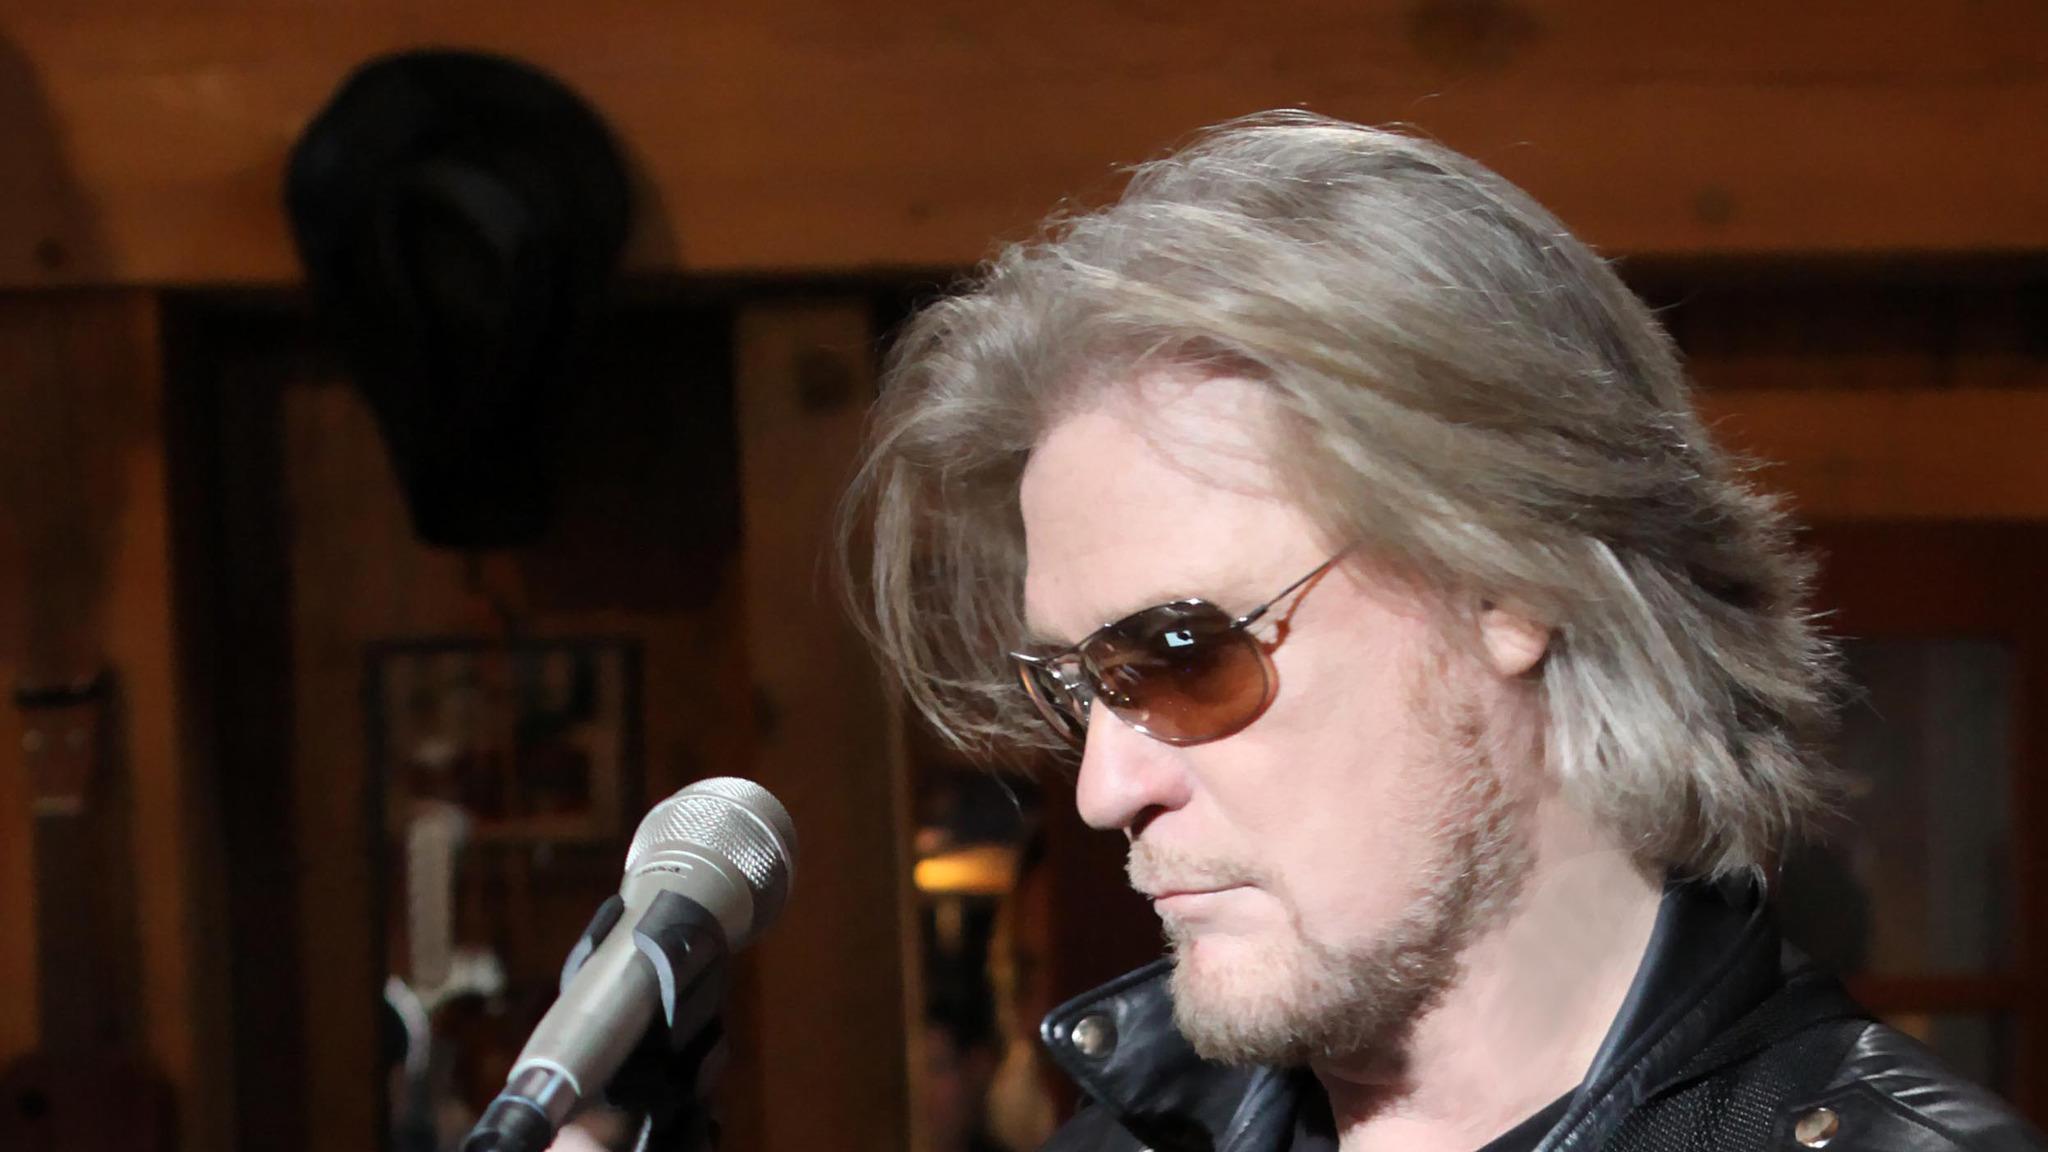 Daryl Hall presale code for event tickets in Montclair, NJ (The Wellmont Theater)